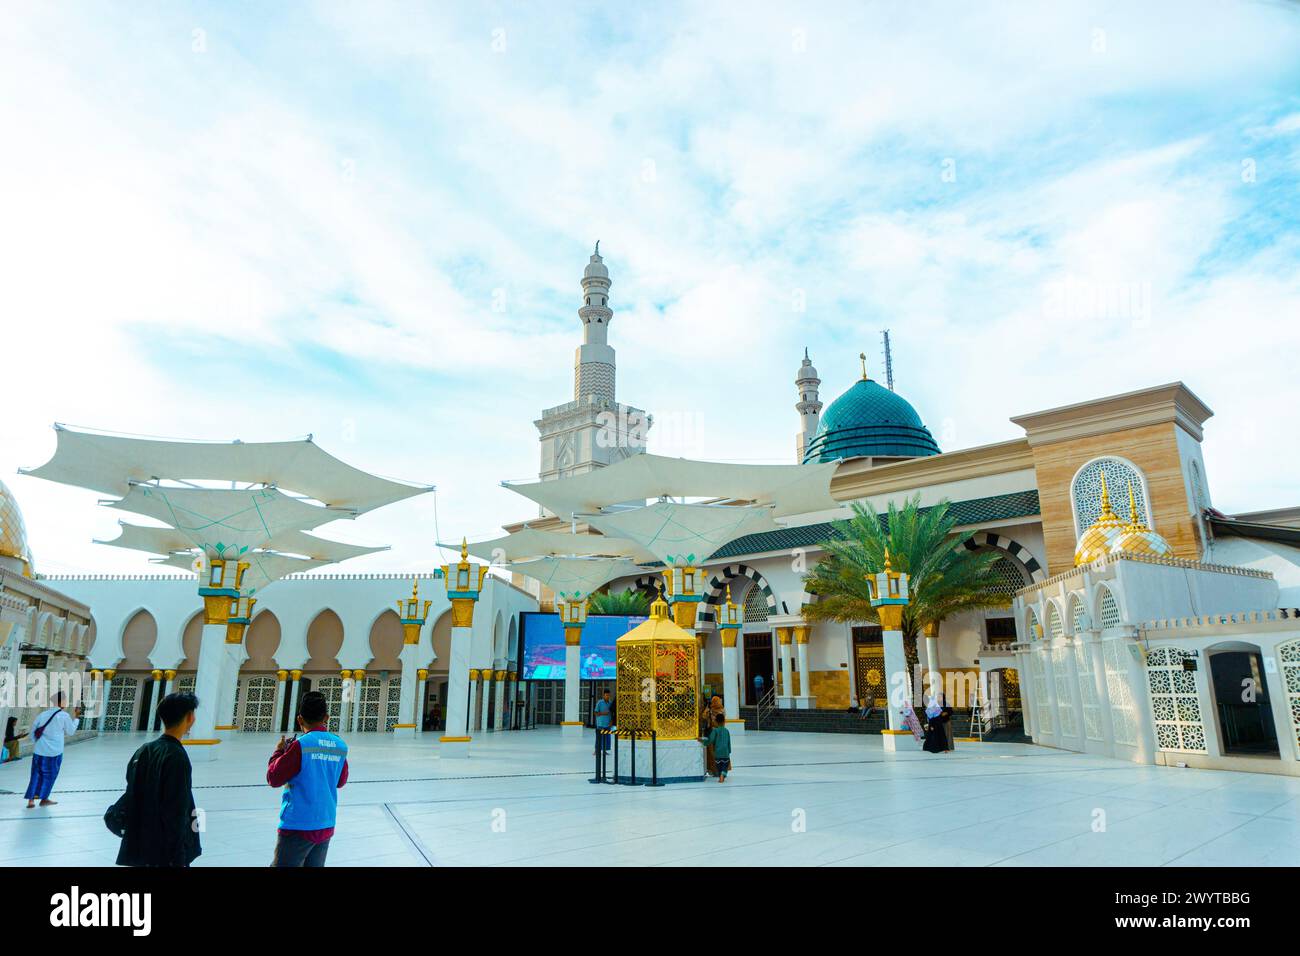 The beautiful Ar-Rahman mosque. This mosque has architecture similar to the Nabawi Mosque in Medina. Stock Photo